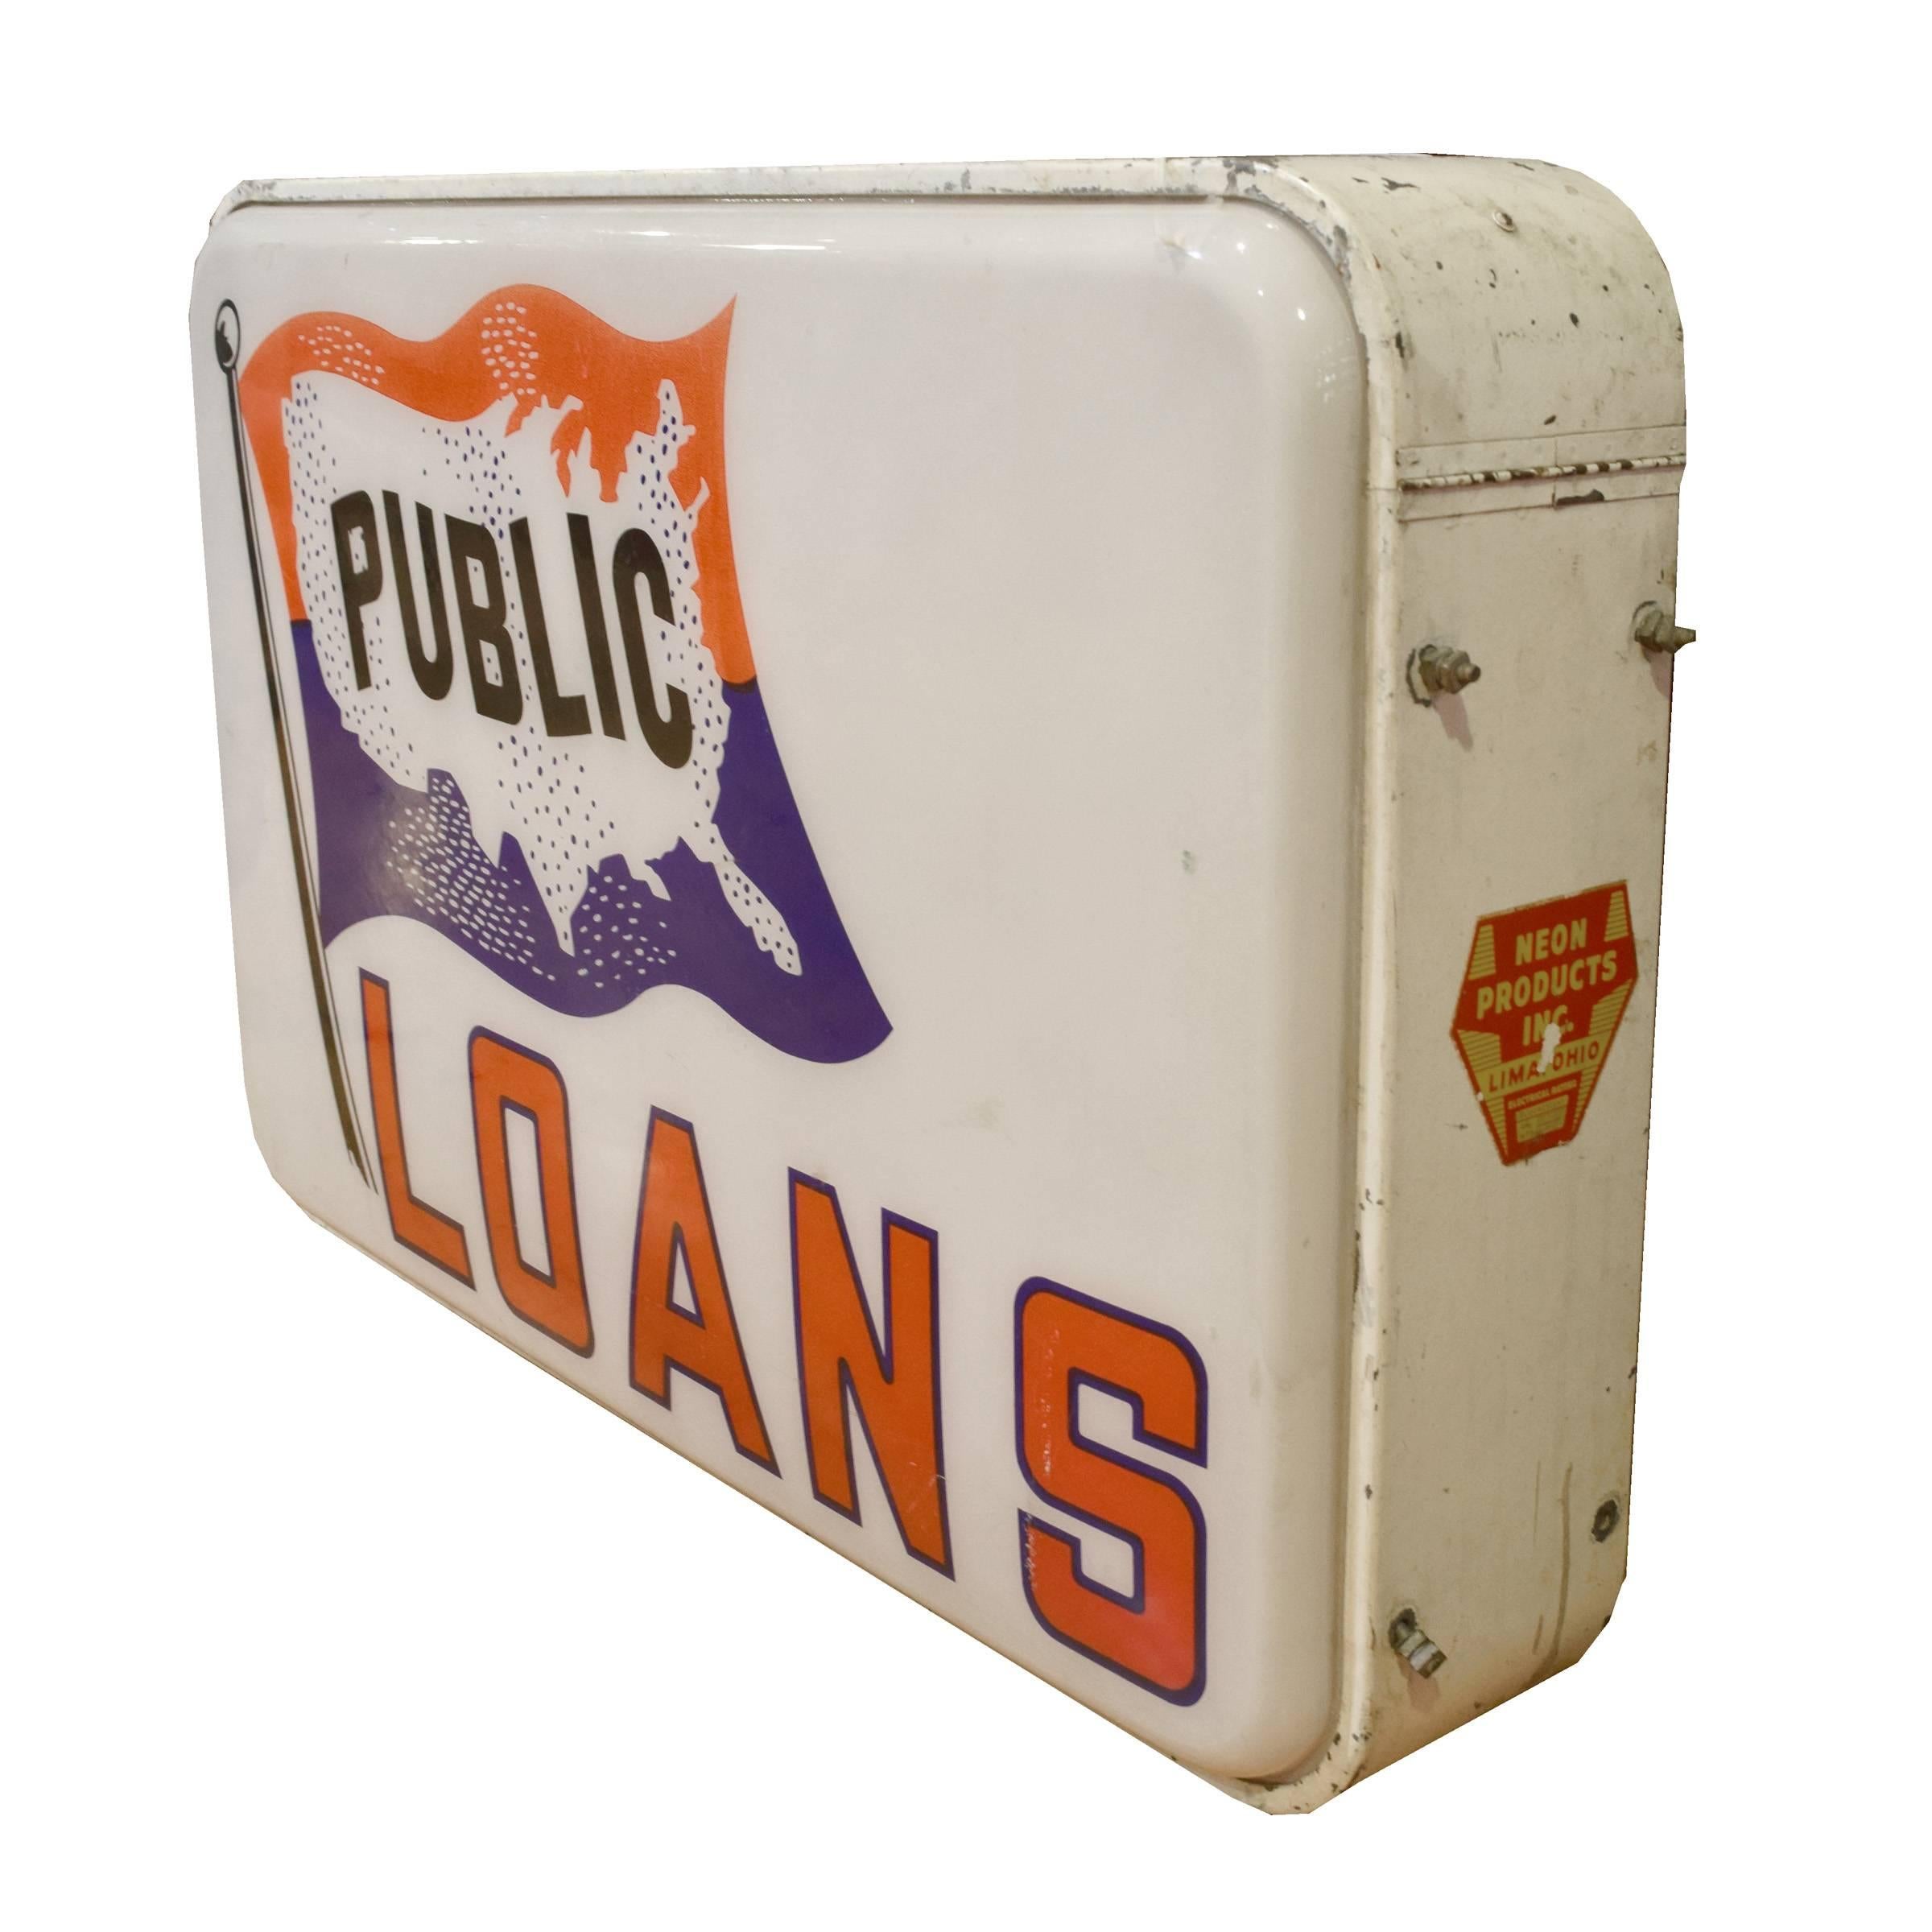 An American public loans exterior lighted sign produced by Neon Products, Inc in Lima, Ohio. Neon Products, Inc began business in 1930 and in its heyday was one of the largest neon sign manufacturers in the United States.